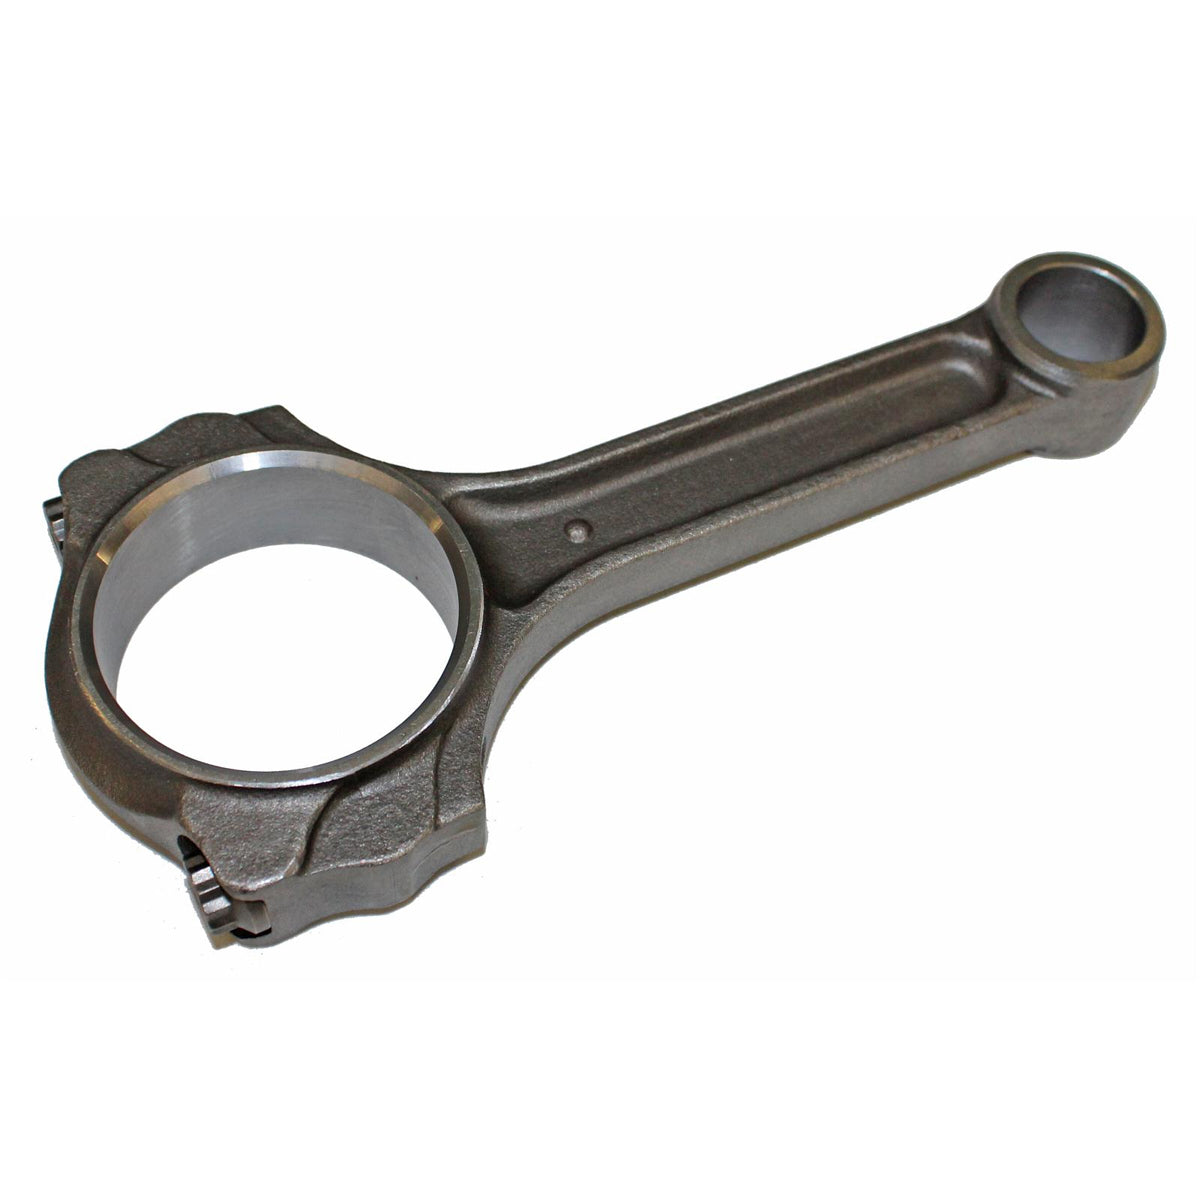 Scat GM LS 4340 Forged I-Beam Connecting Rods 6.100 SCA2-ICR6100-944